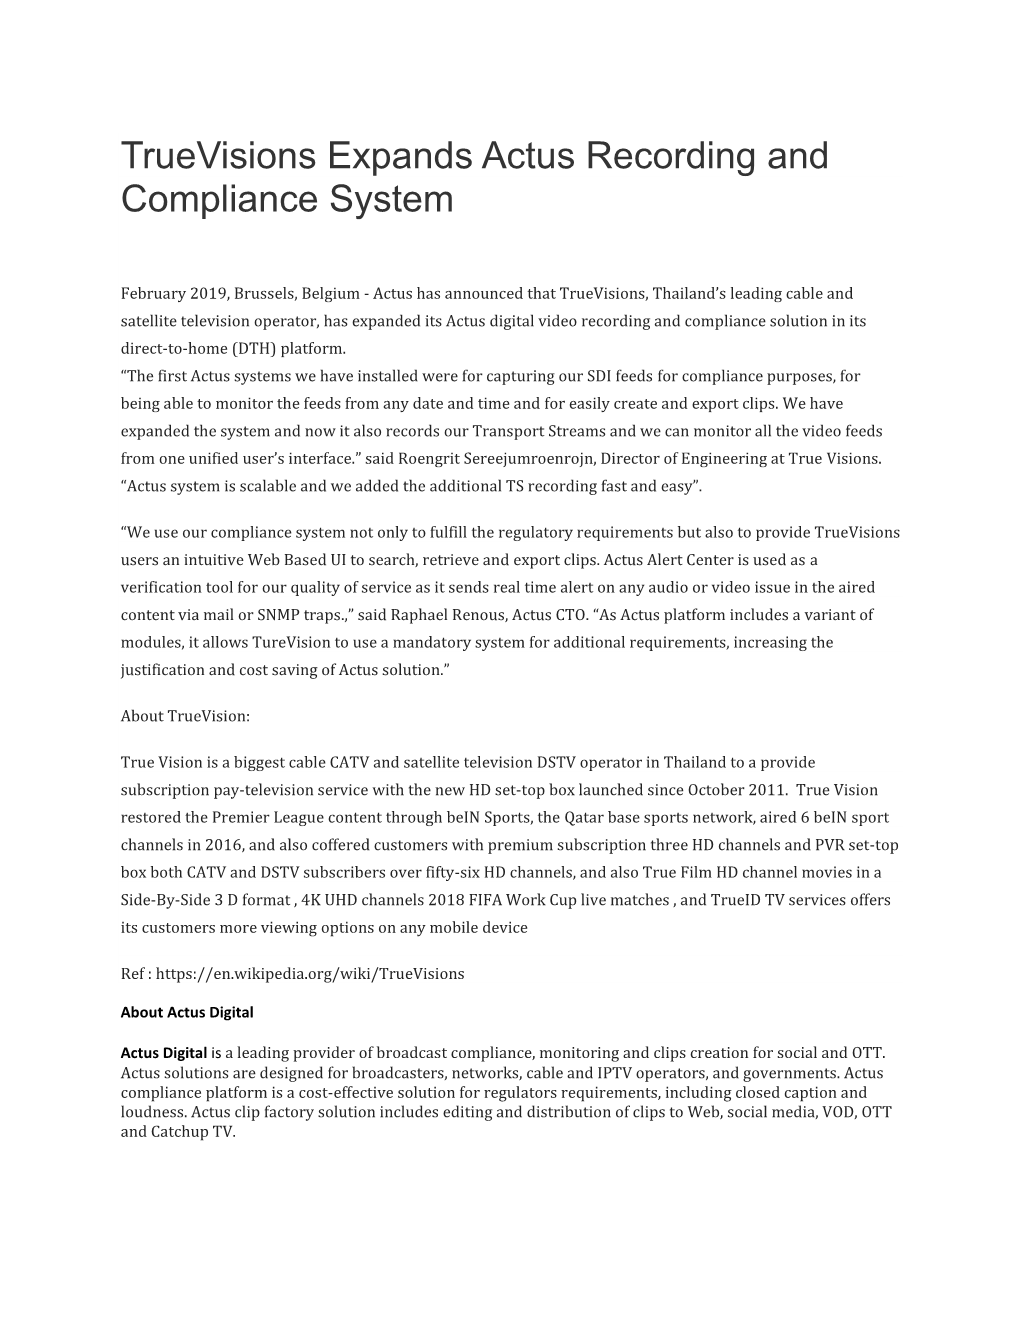 Truevisions Expands Actus Recording and Compliance System